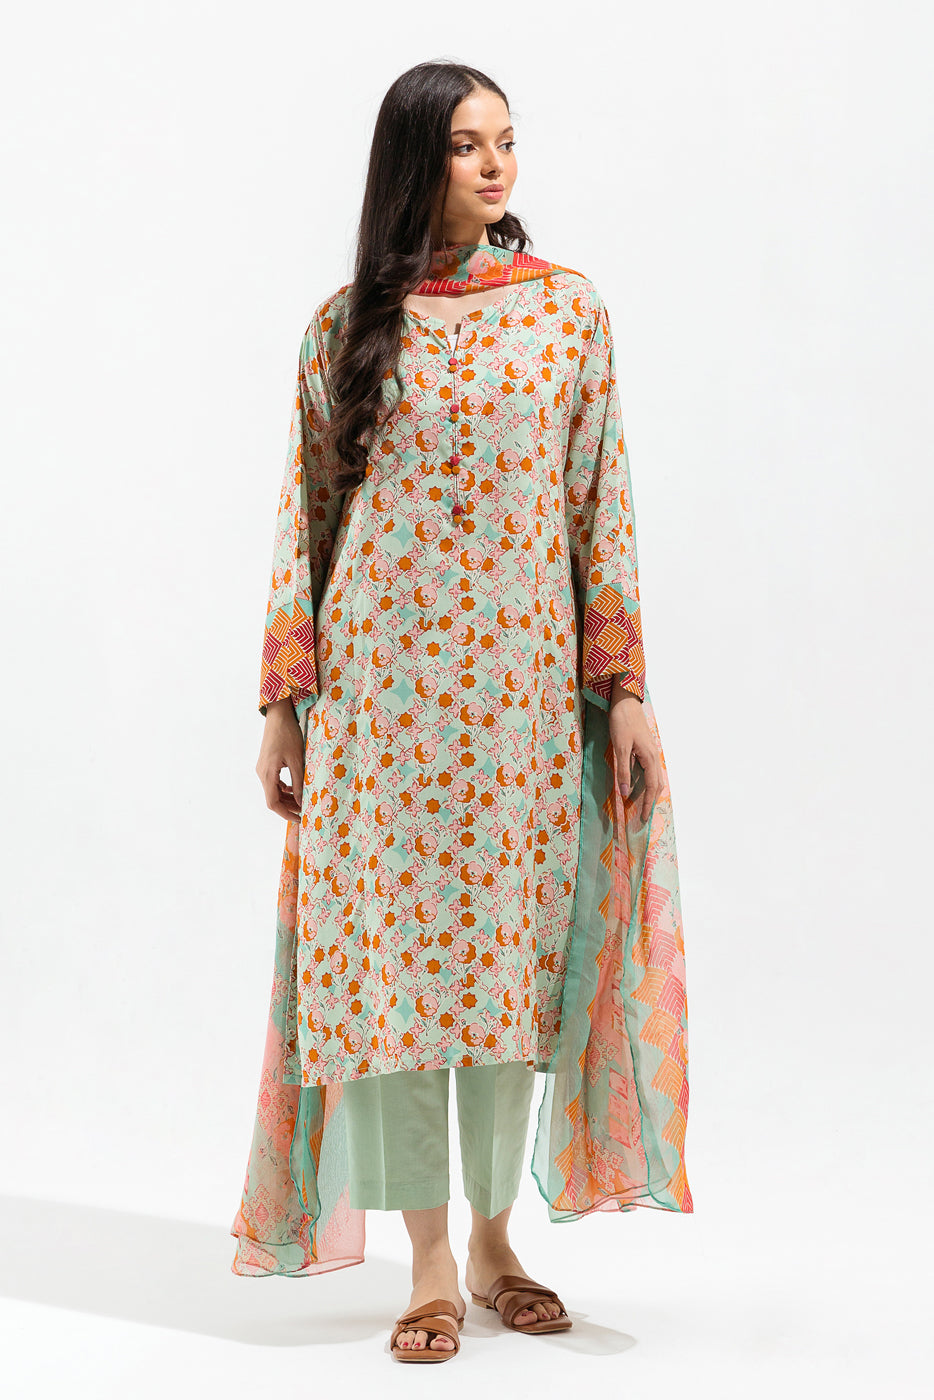 3 PIECE - PRINTED VISCOSE SUIT - MINT IVY (UNSTITCHED) - BEECHTREE